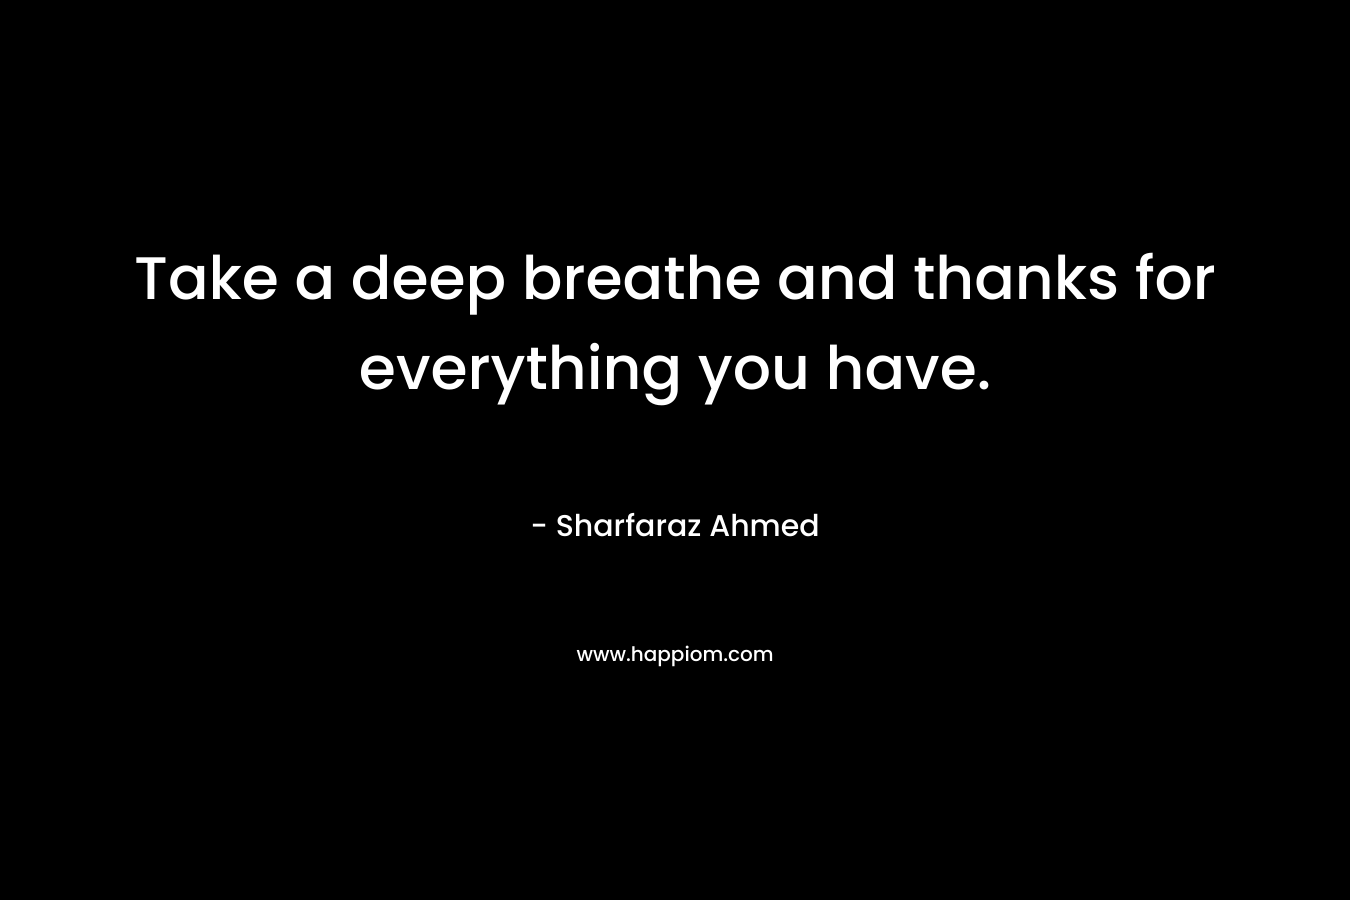 Take a deep breathe and thanks for everything you have.